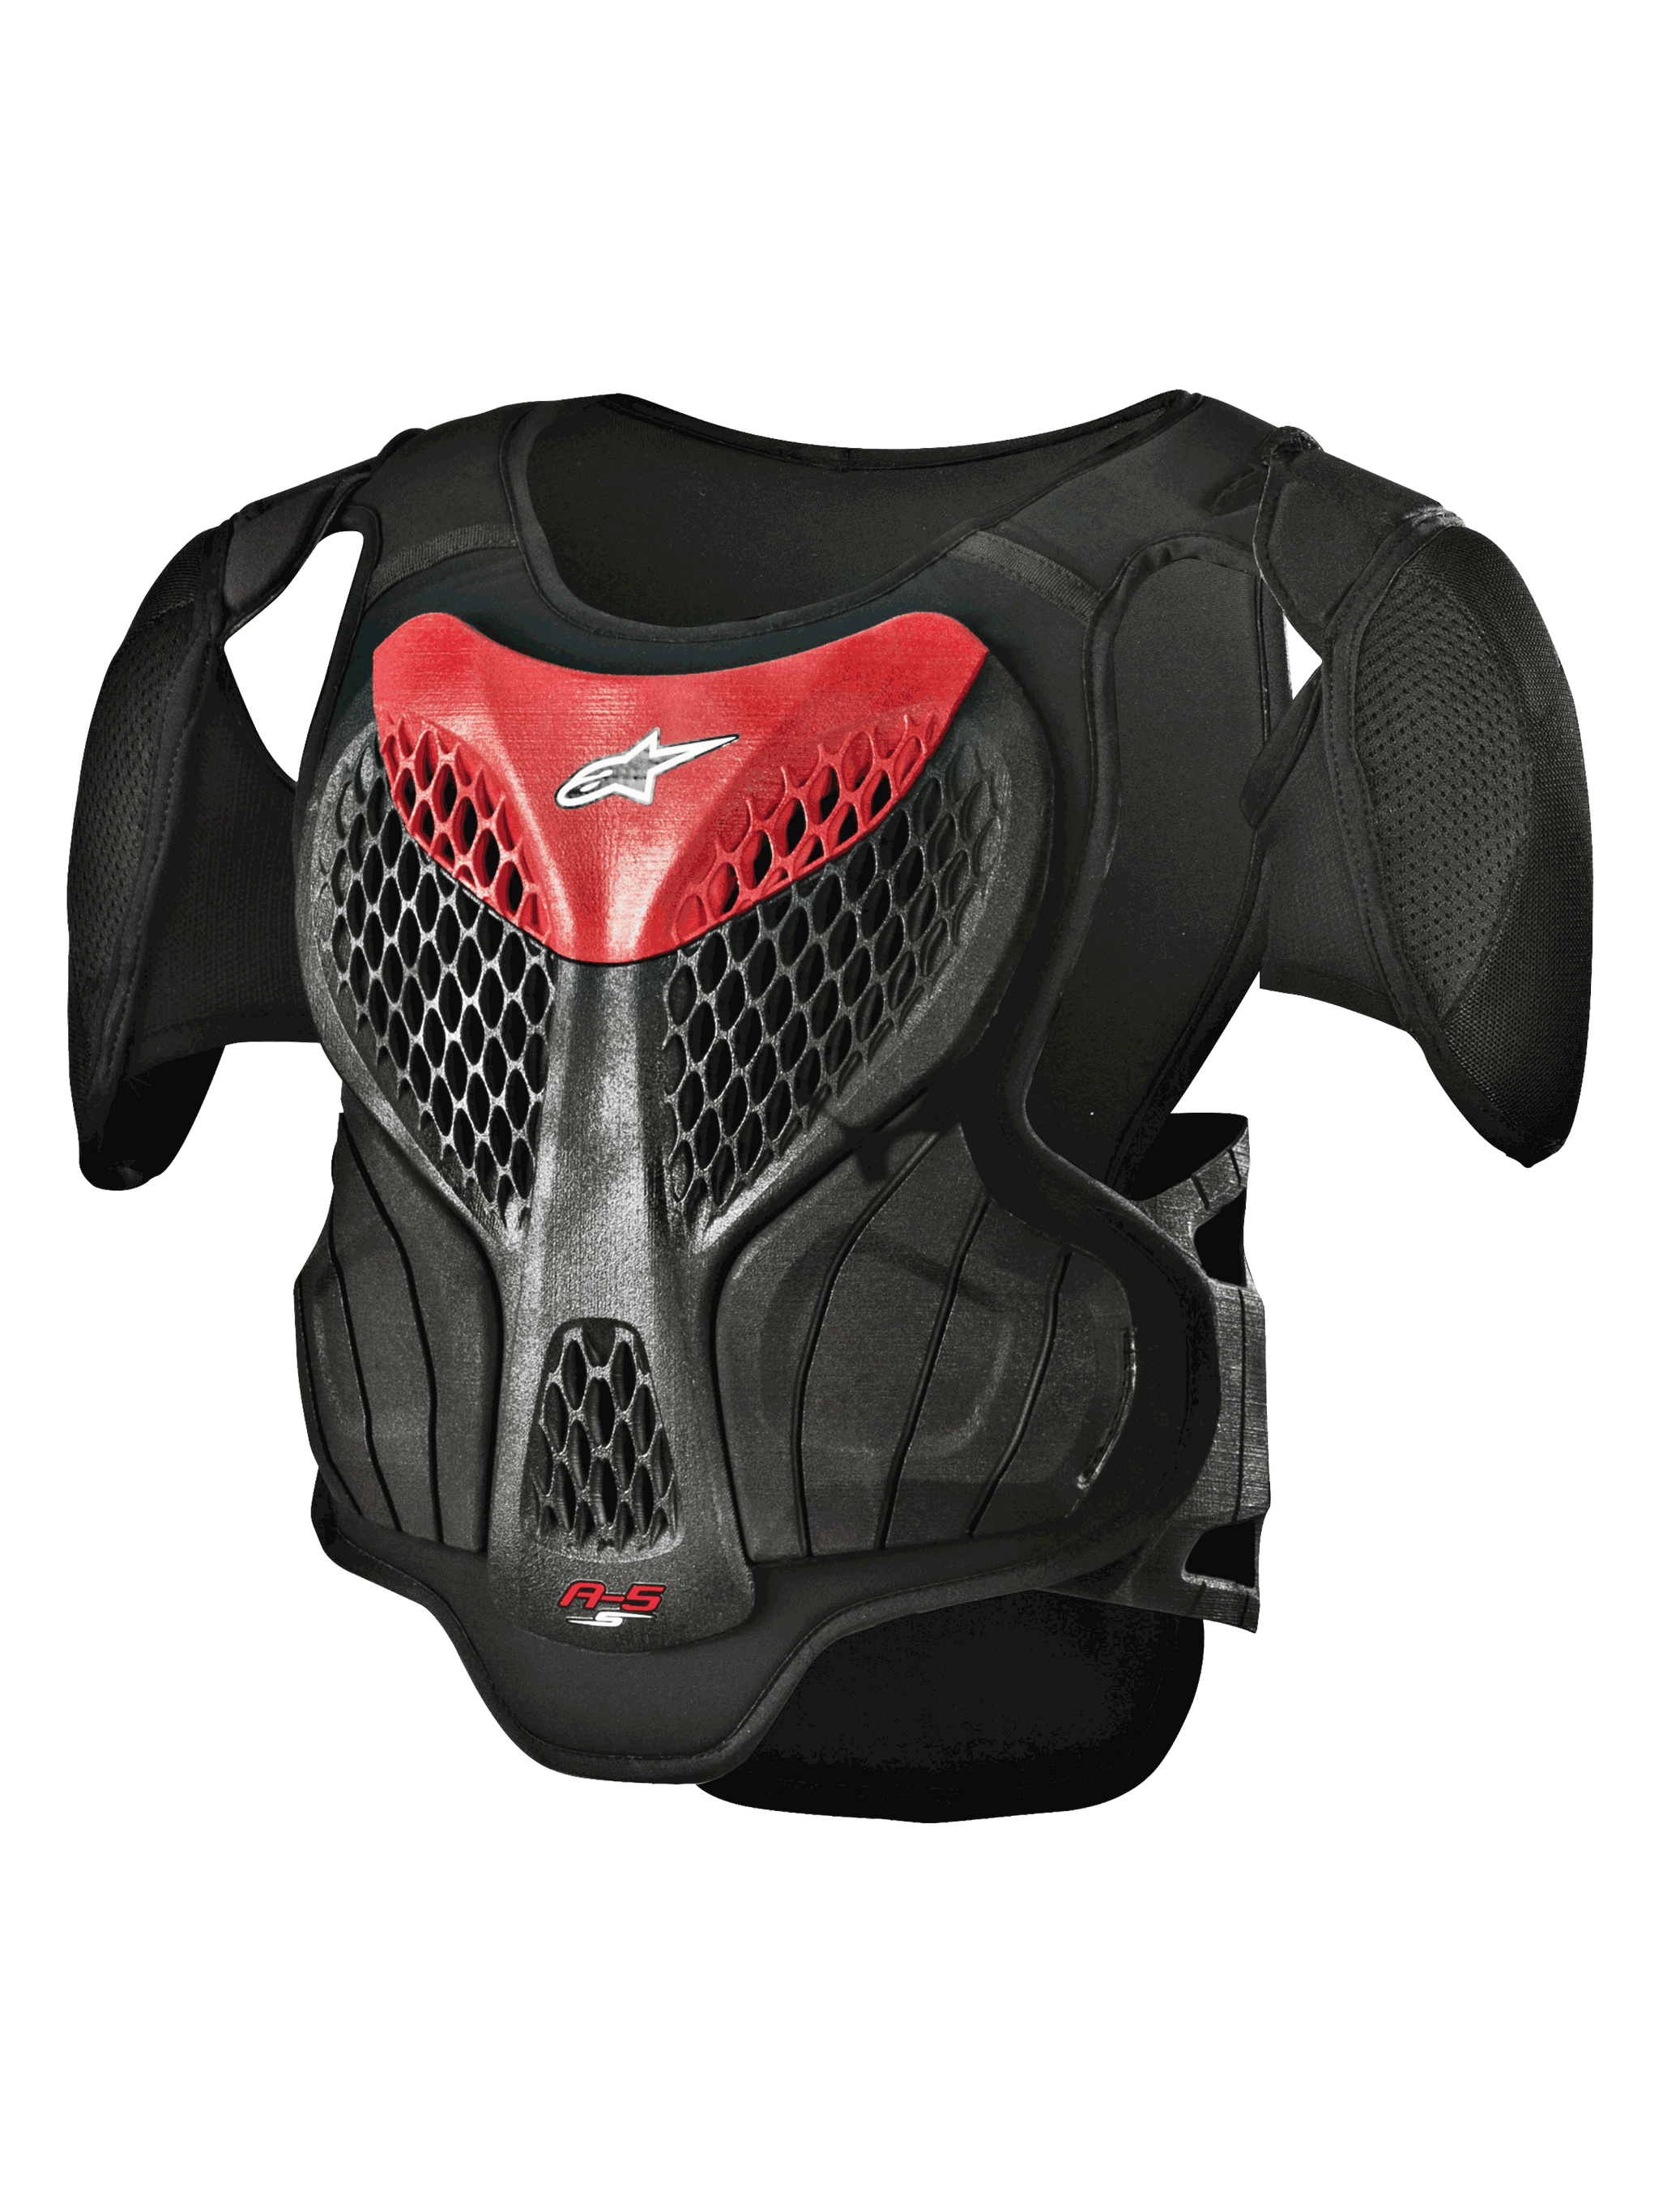 Jugendliche A-5 S Body Armour